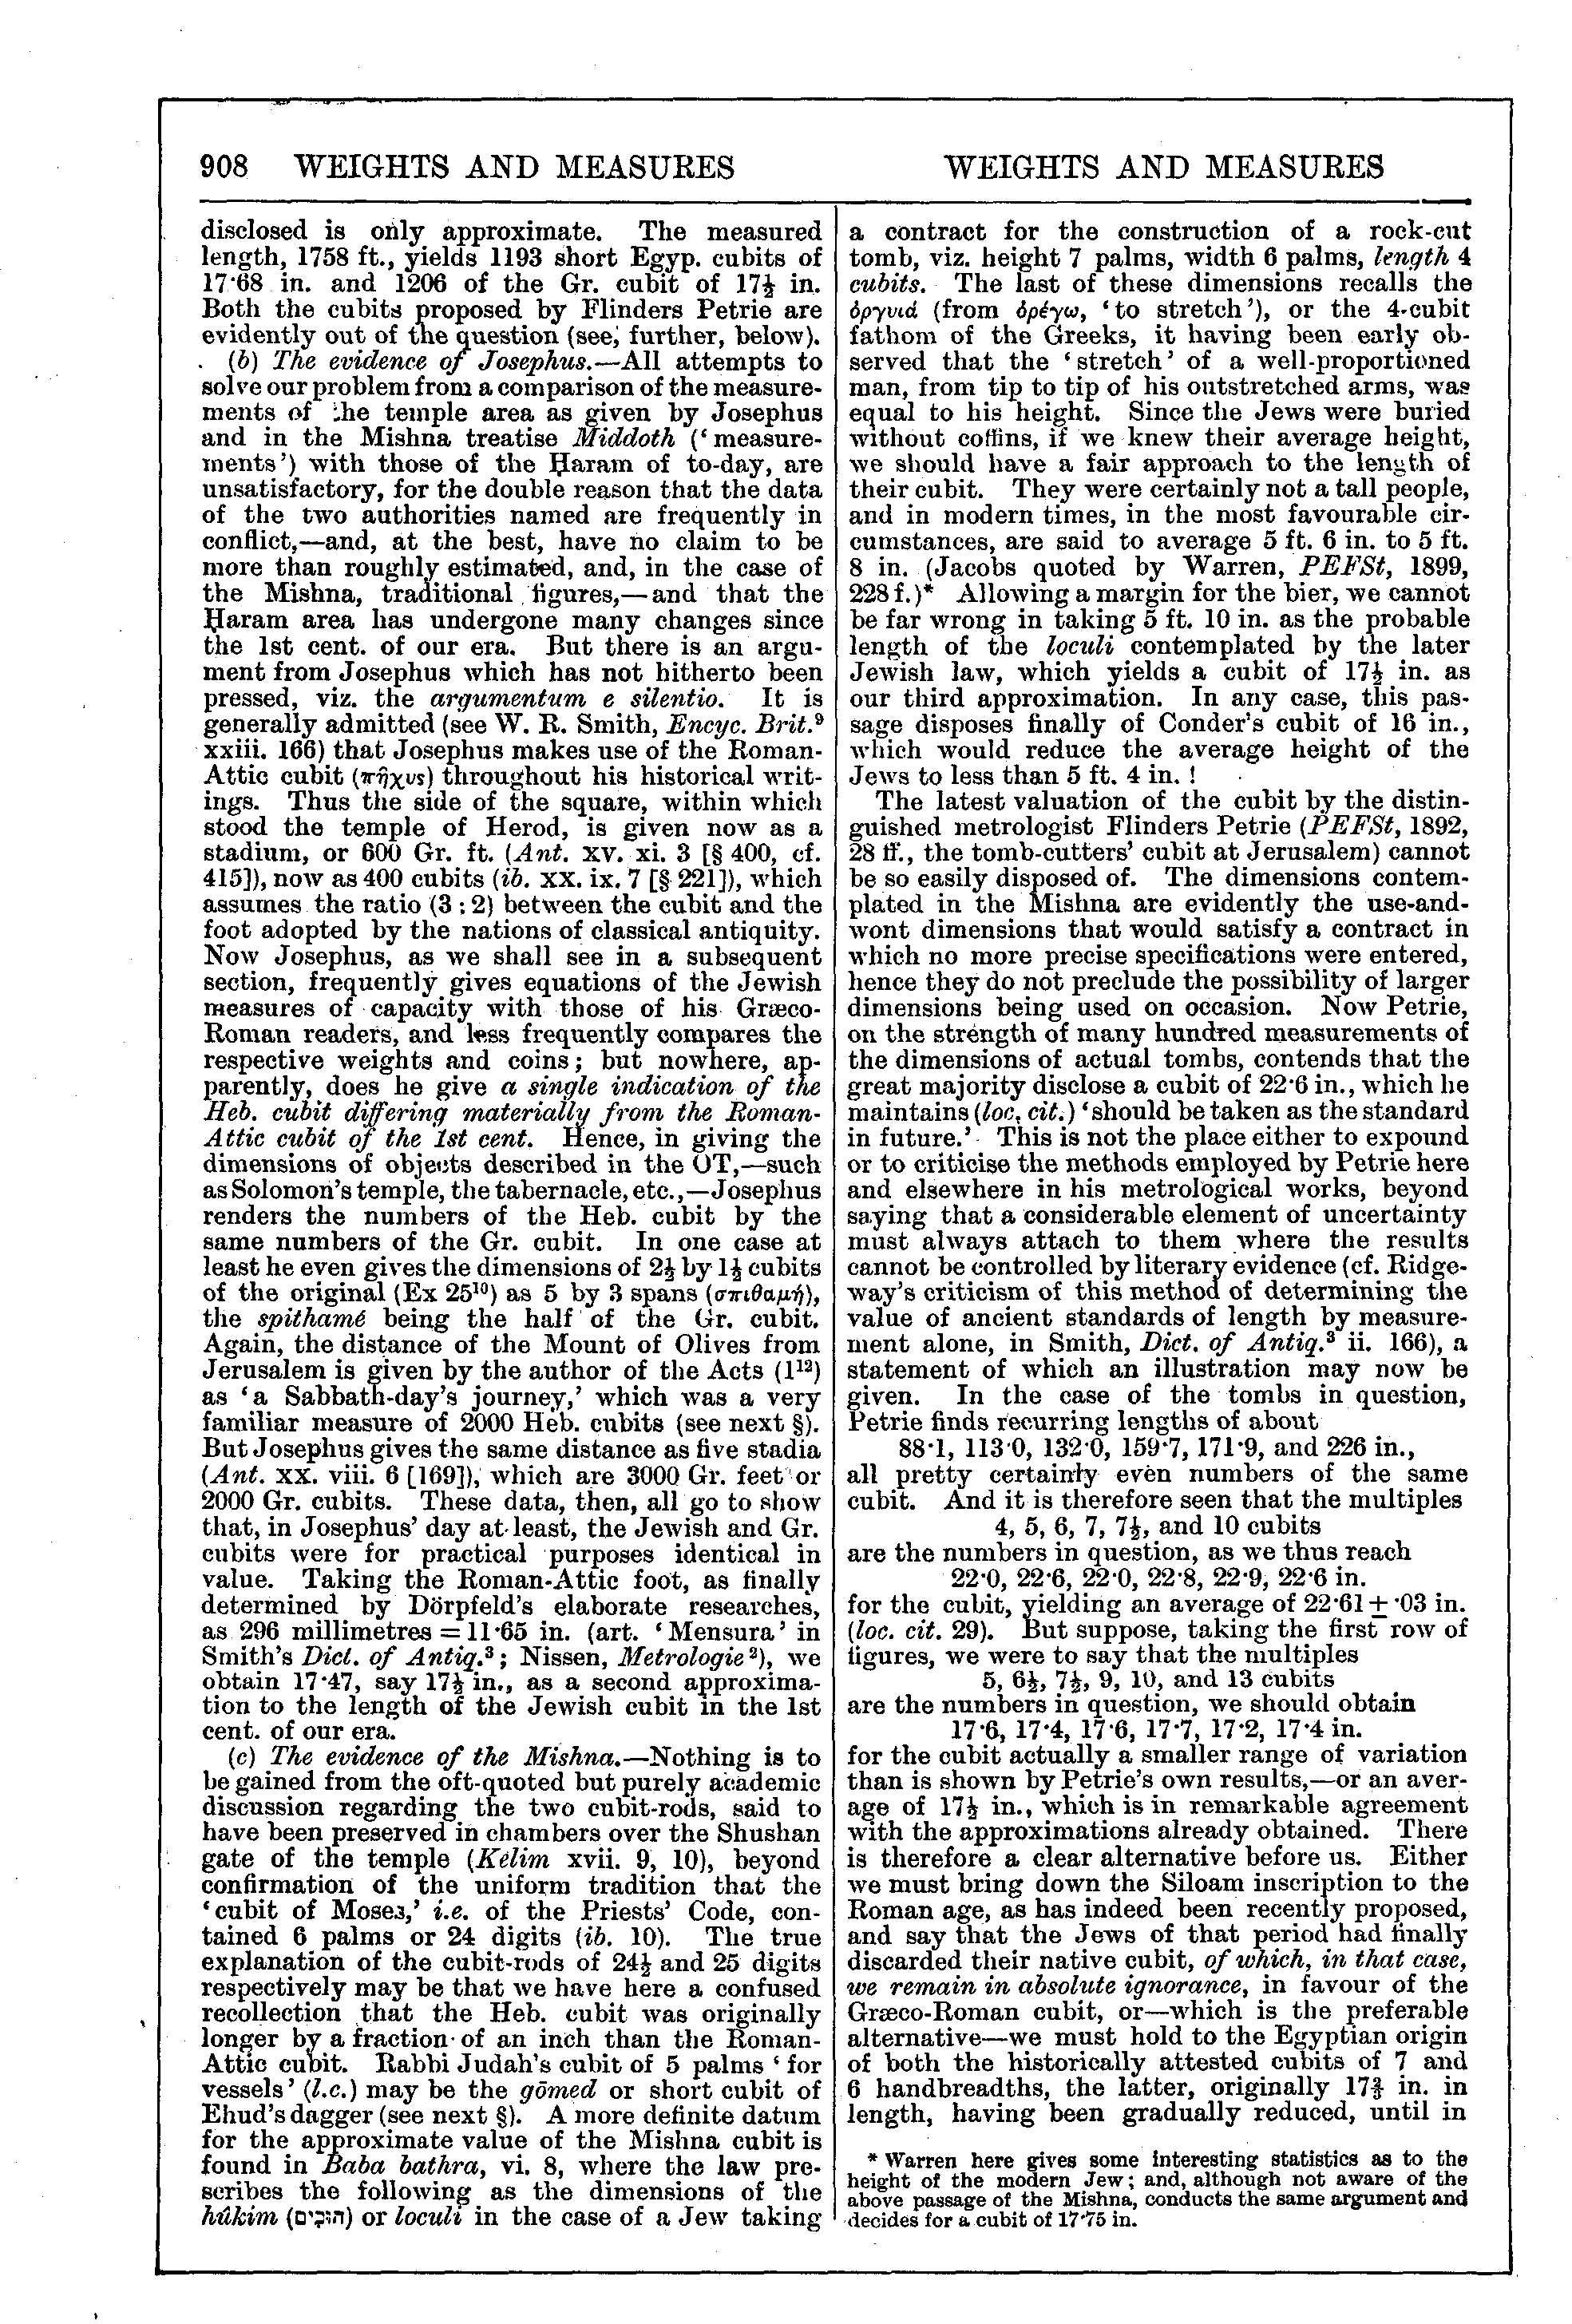 Image of page 908